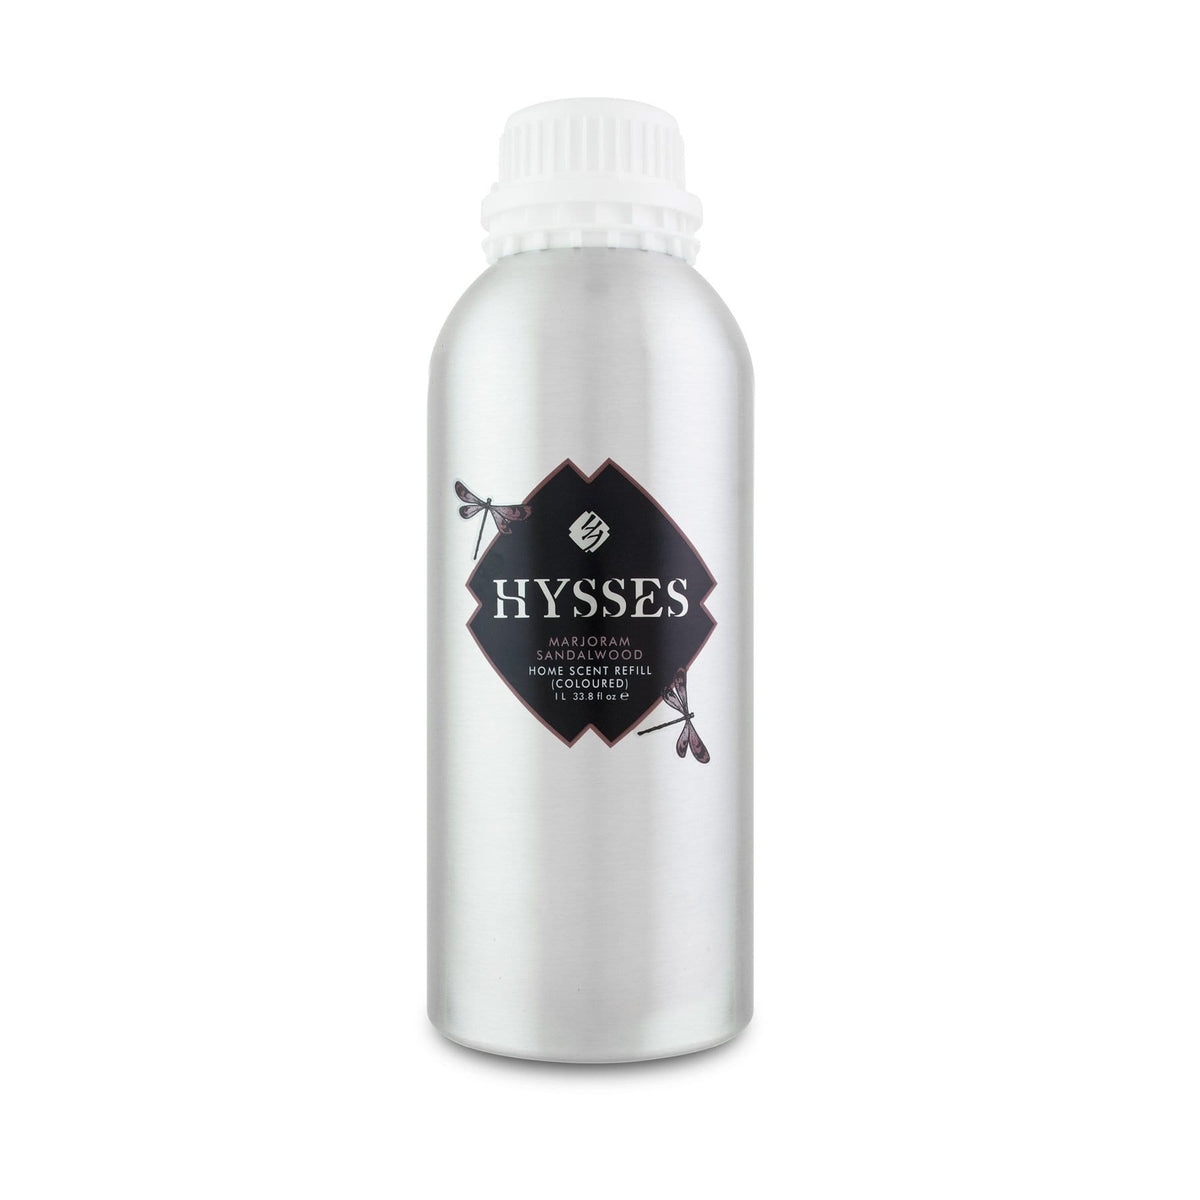 Hysses Home Scents 1000ml Refill Home Scent  Marjoram Sandalwood (Green Coloured)